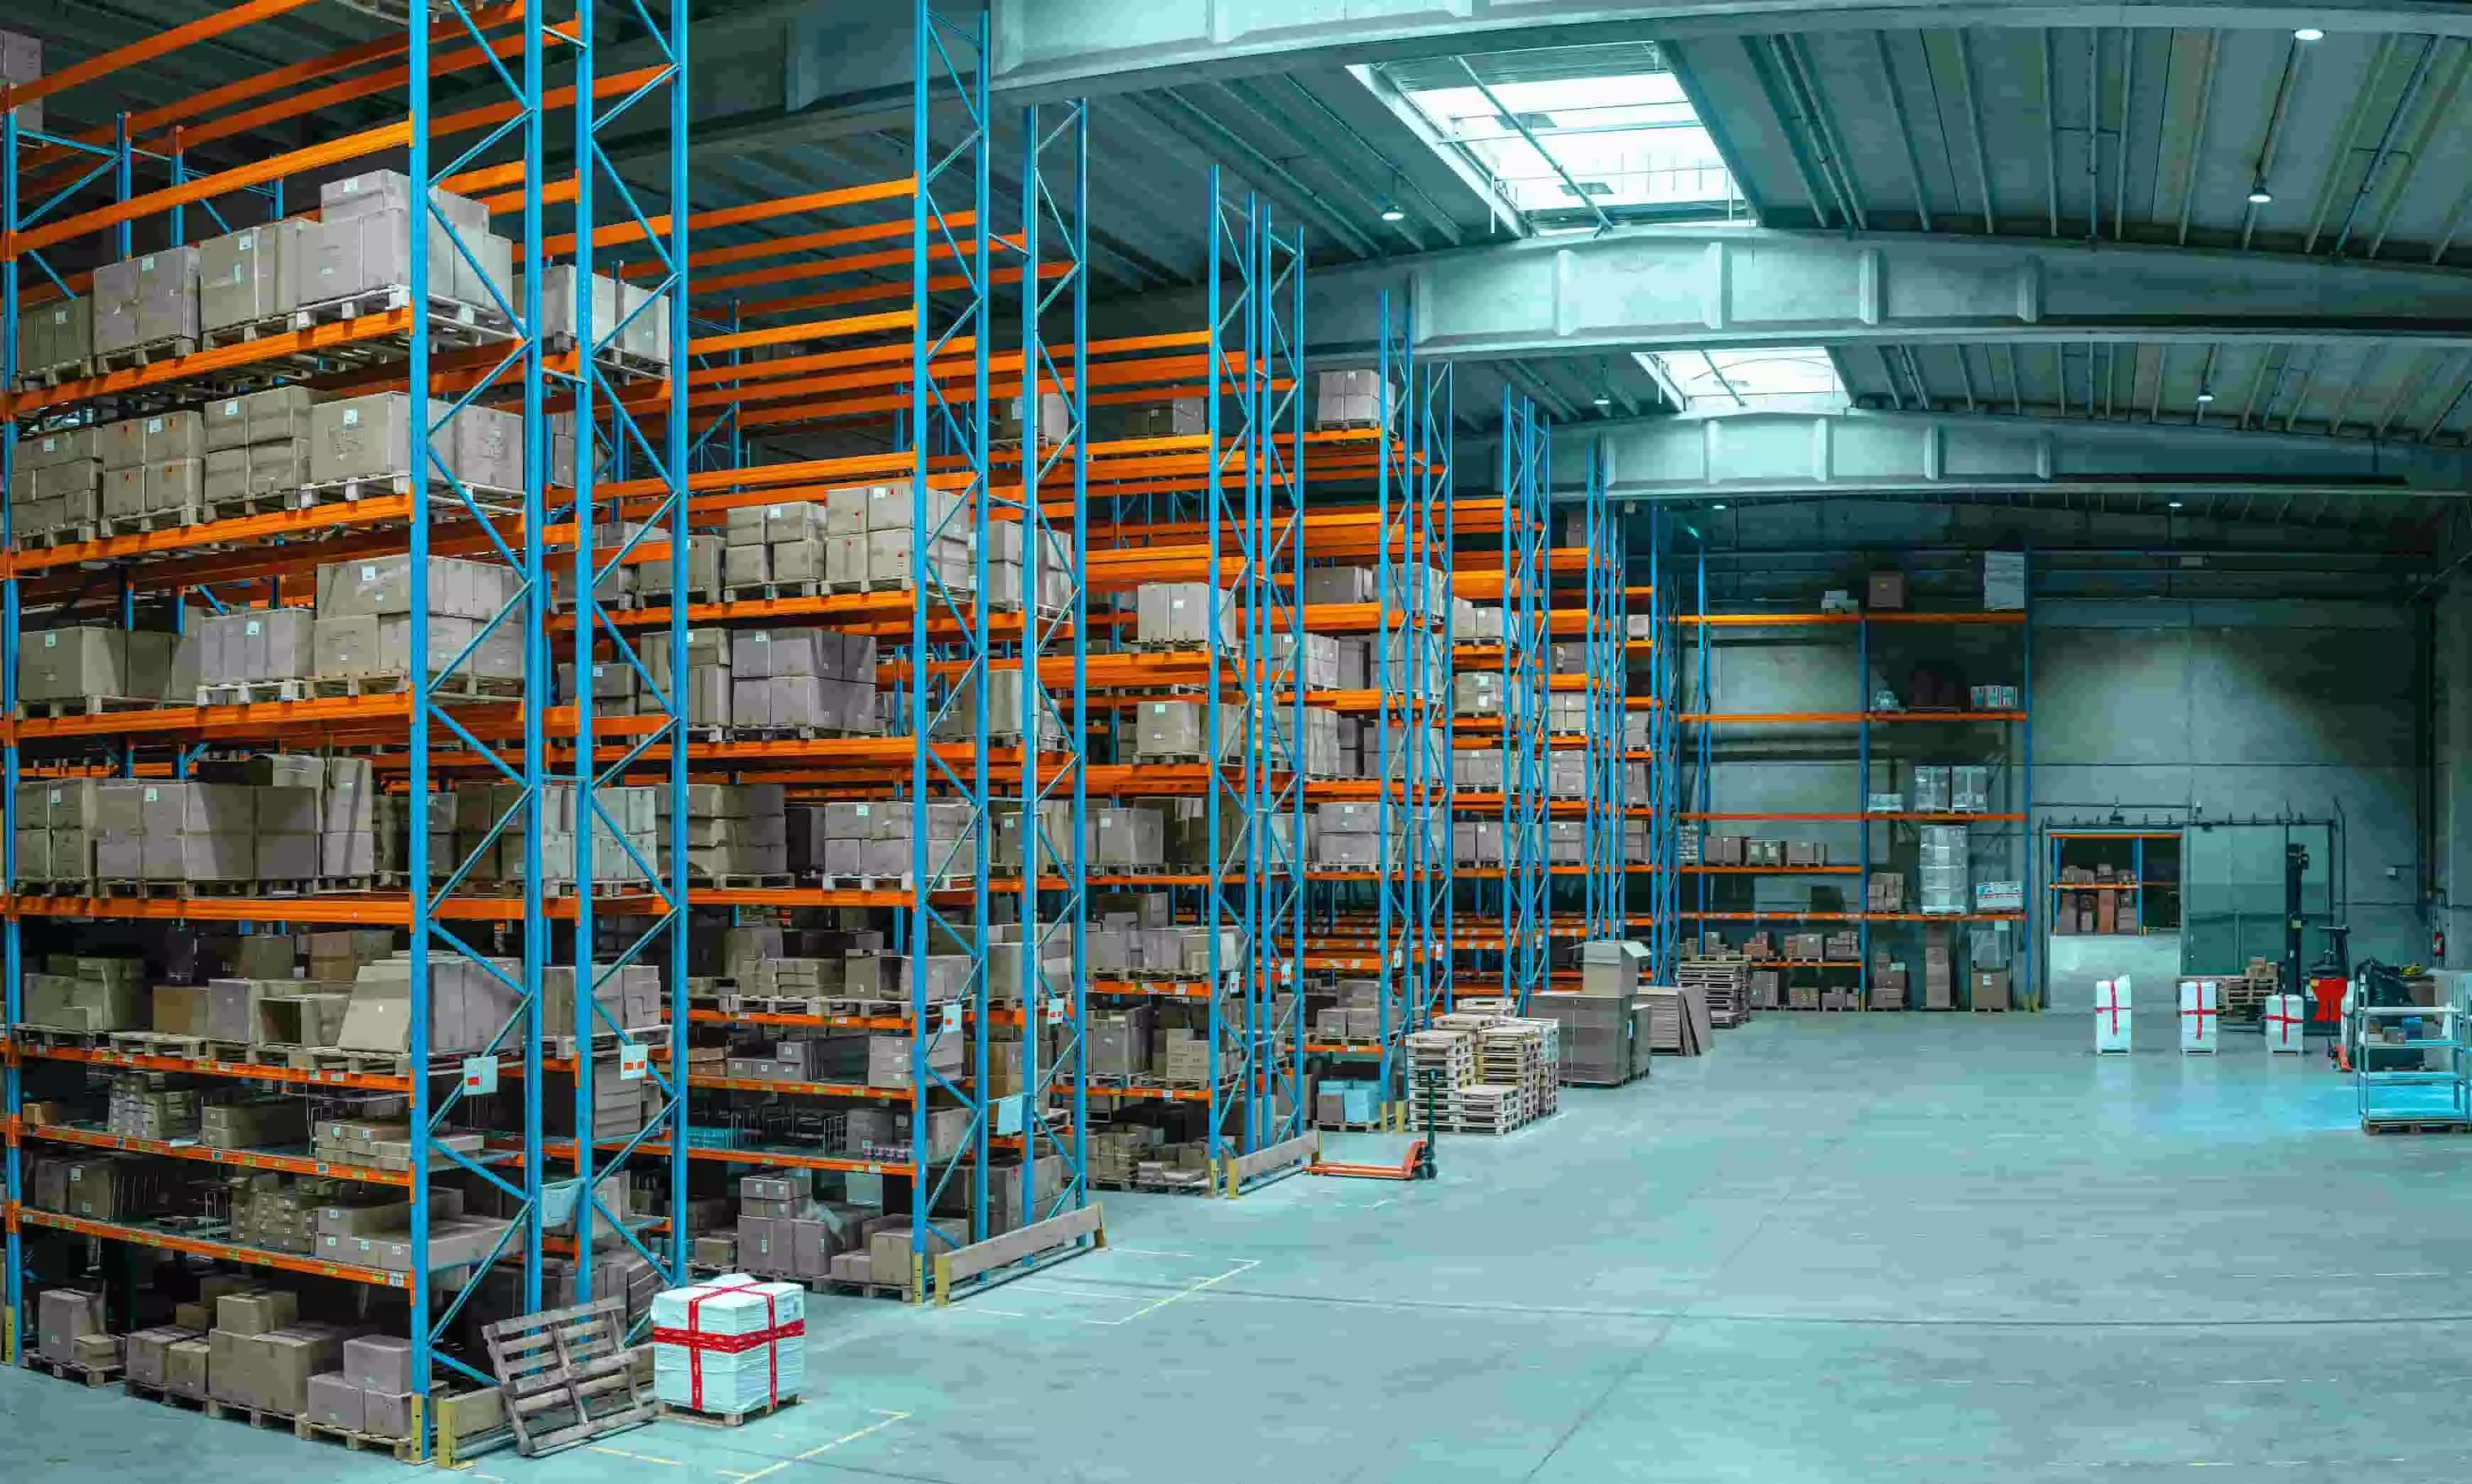 India’s warehousing boom: A game changer for businesses globally